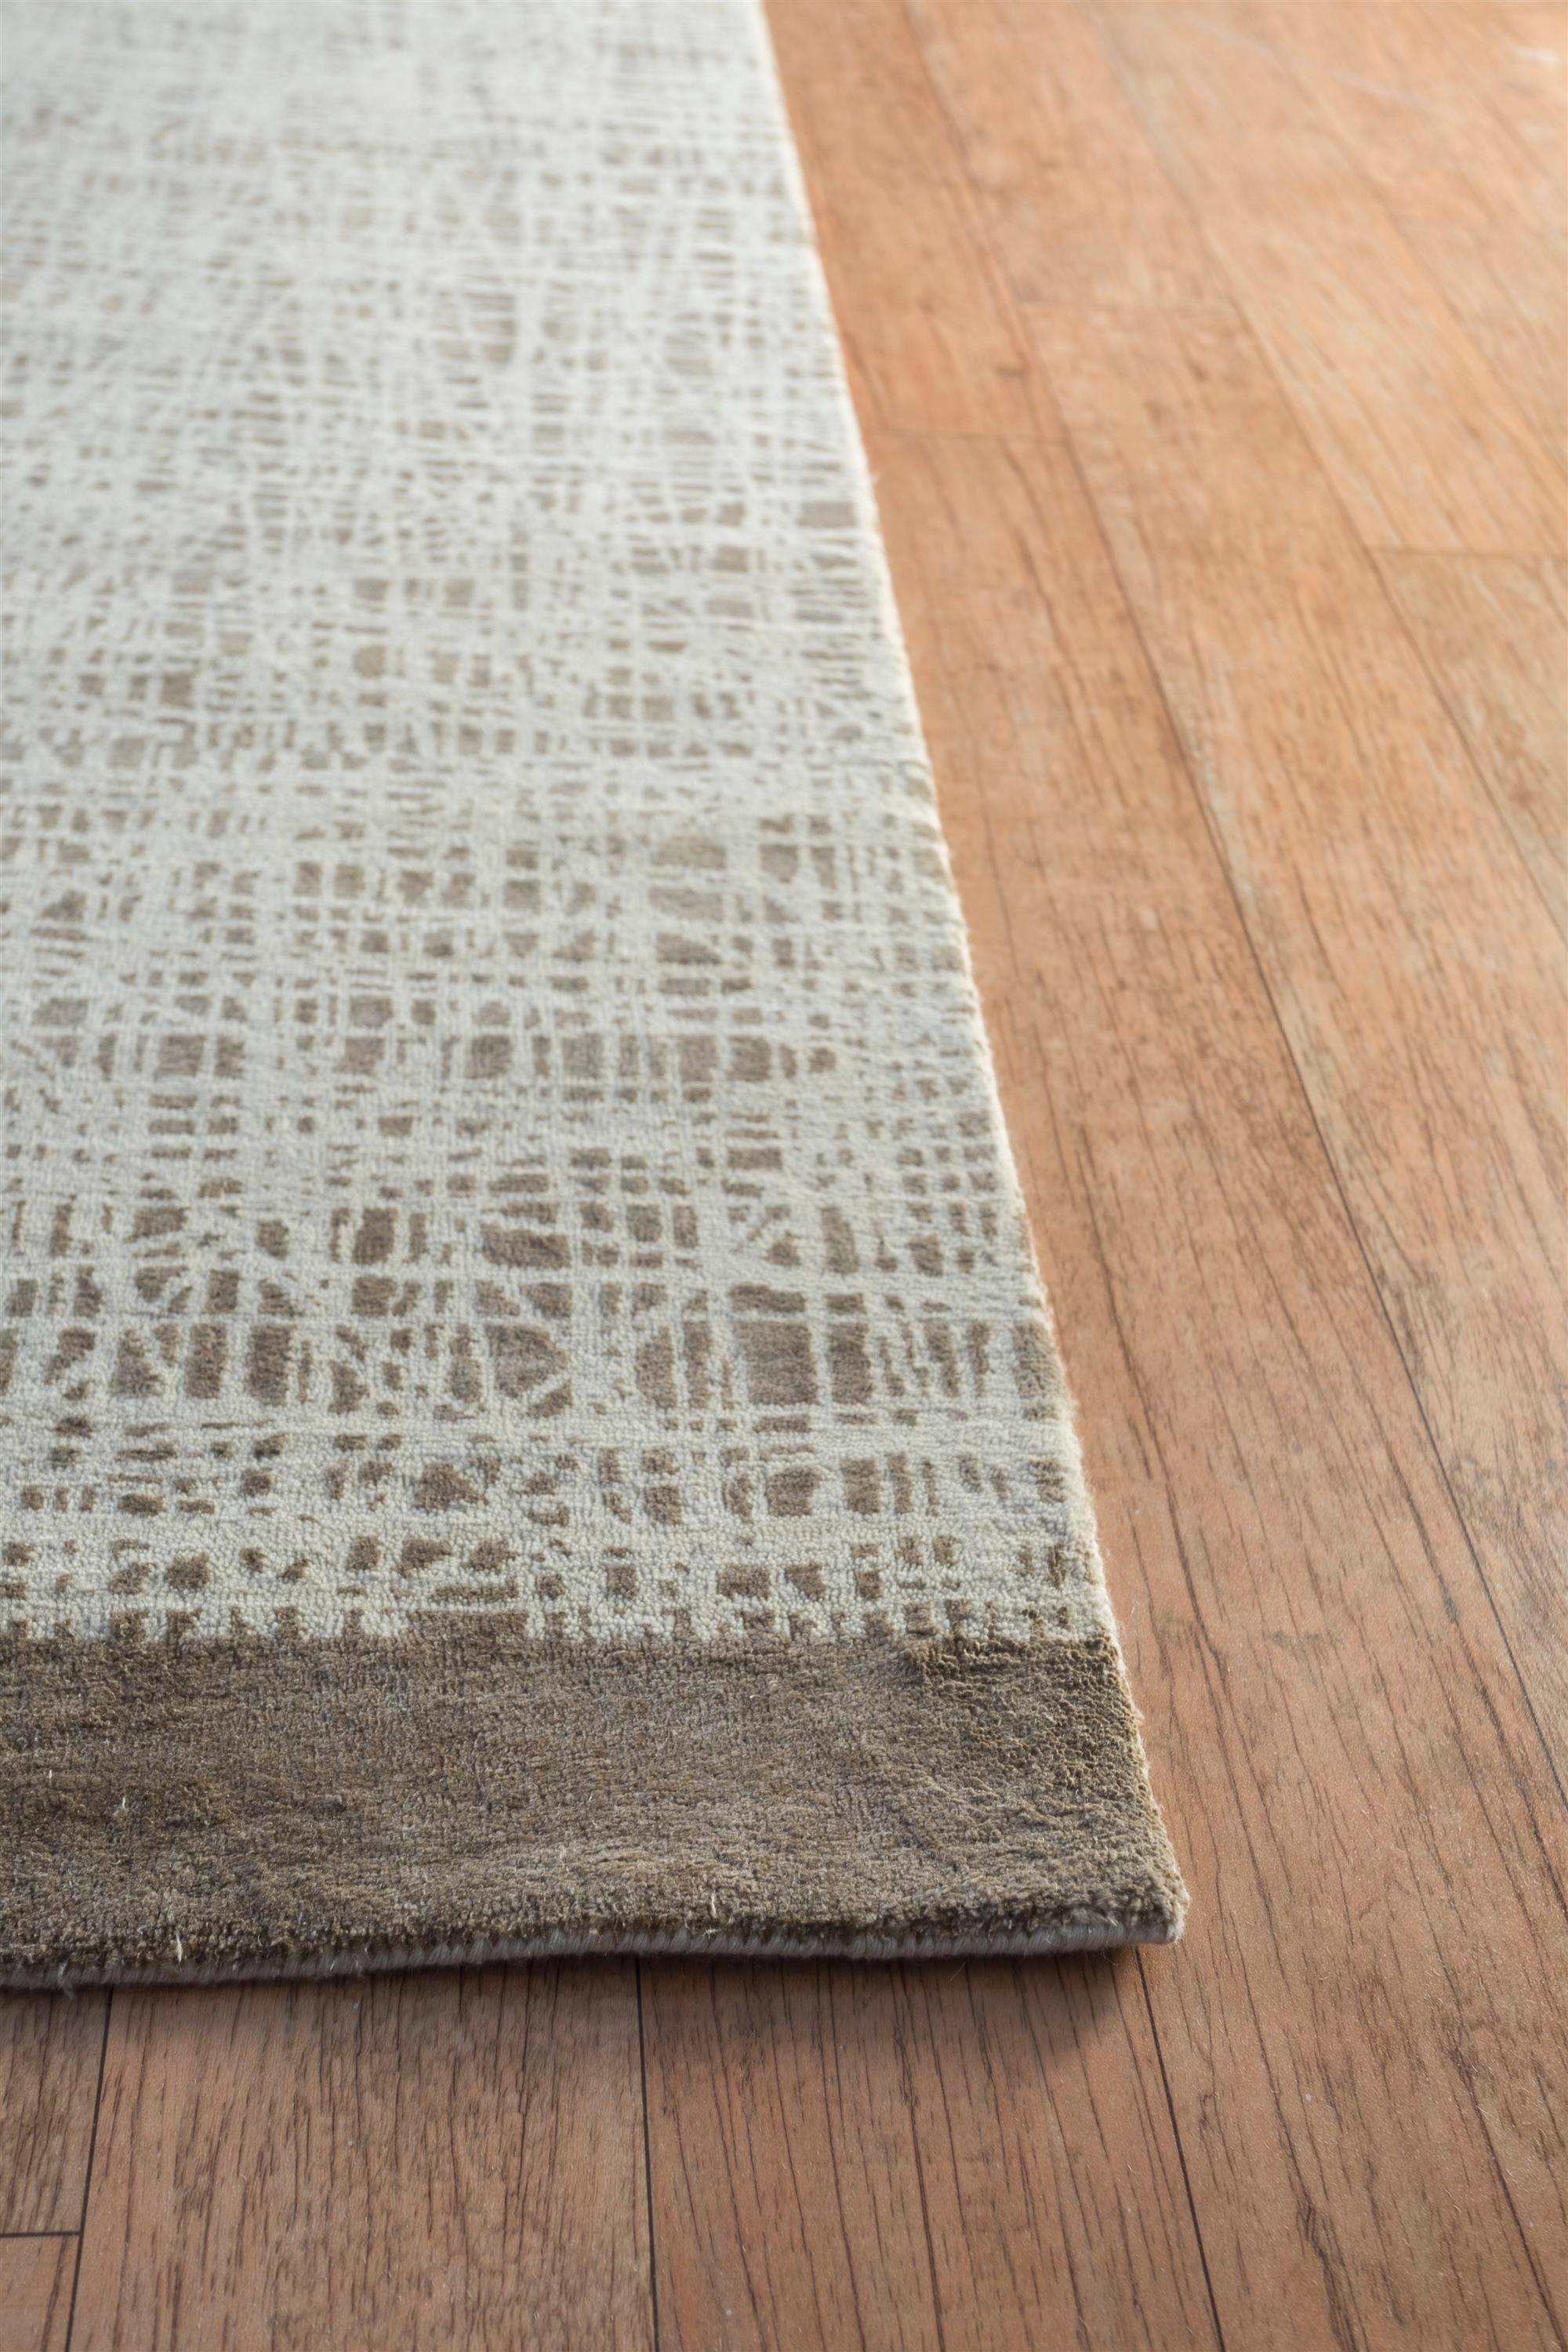 Handwoven with meticulous precision, this rug from our Free Verse By Kavi collection tells a story of tradition and artistry, making it more than just a rug. The Antique White Natural Beige Rug boasts an exquisite pattern that harmoniously blends